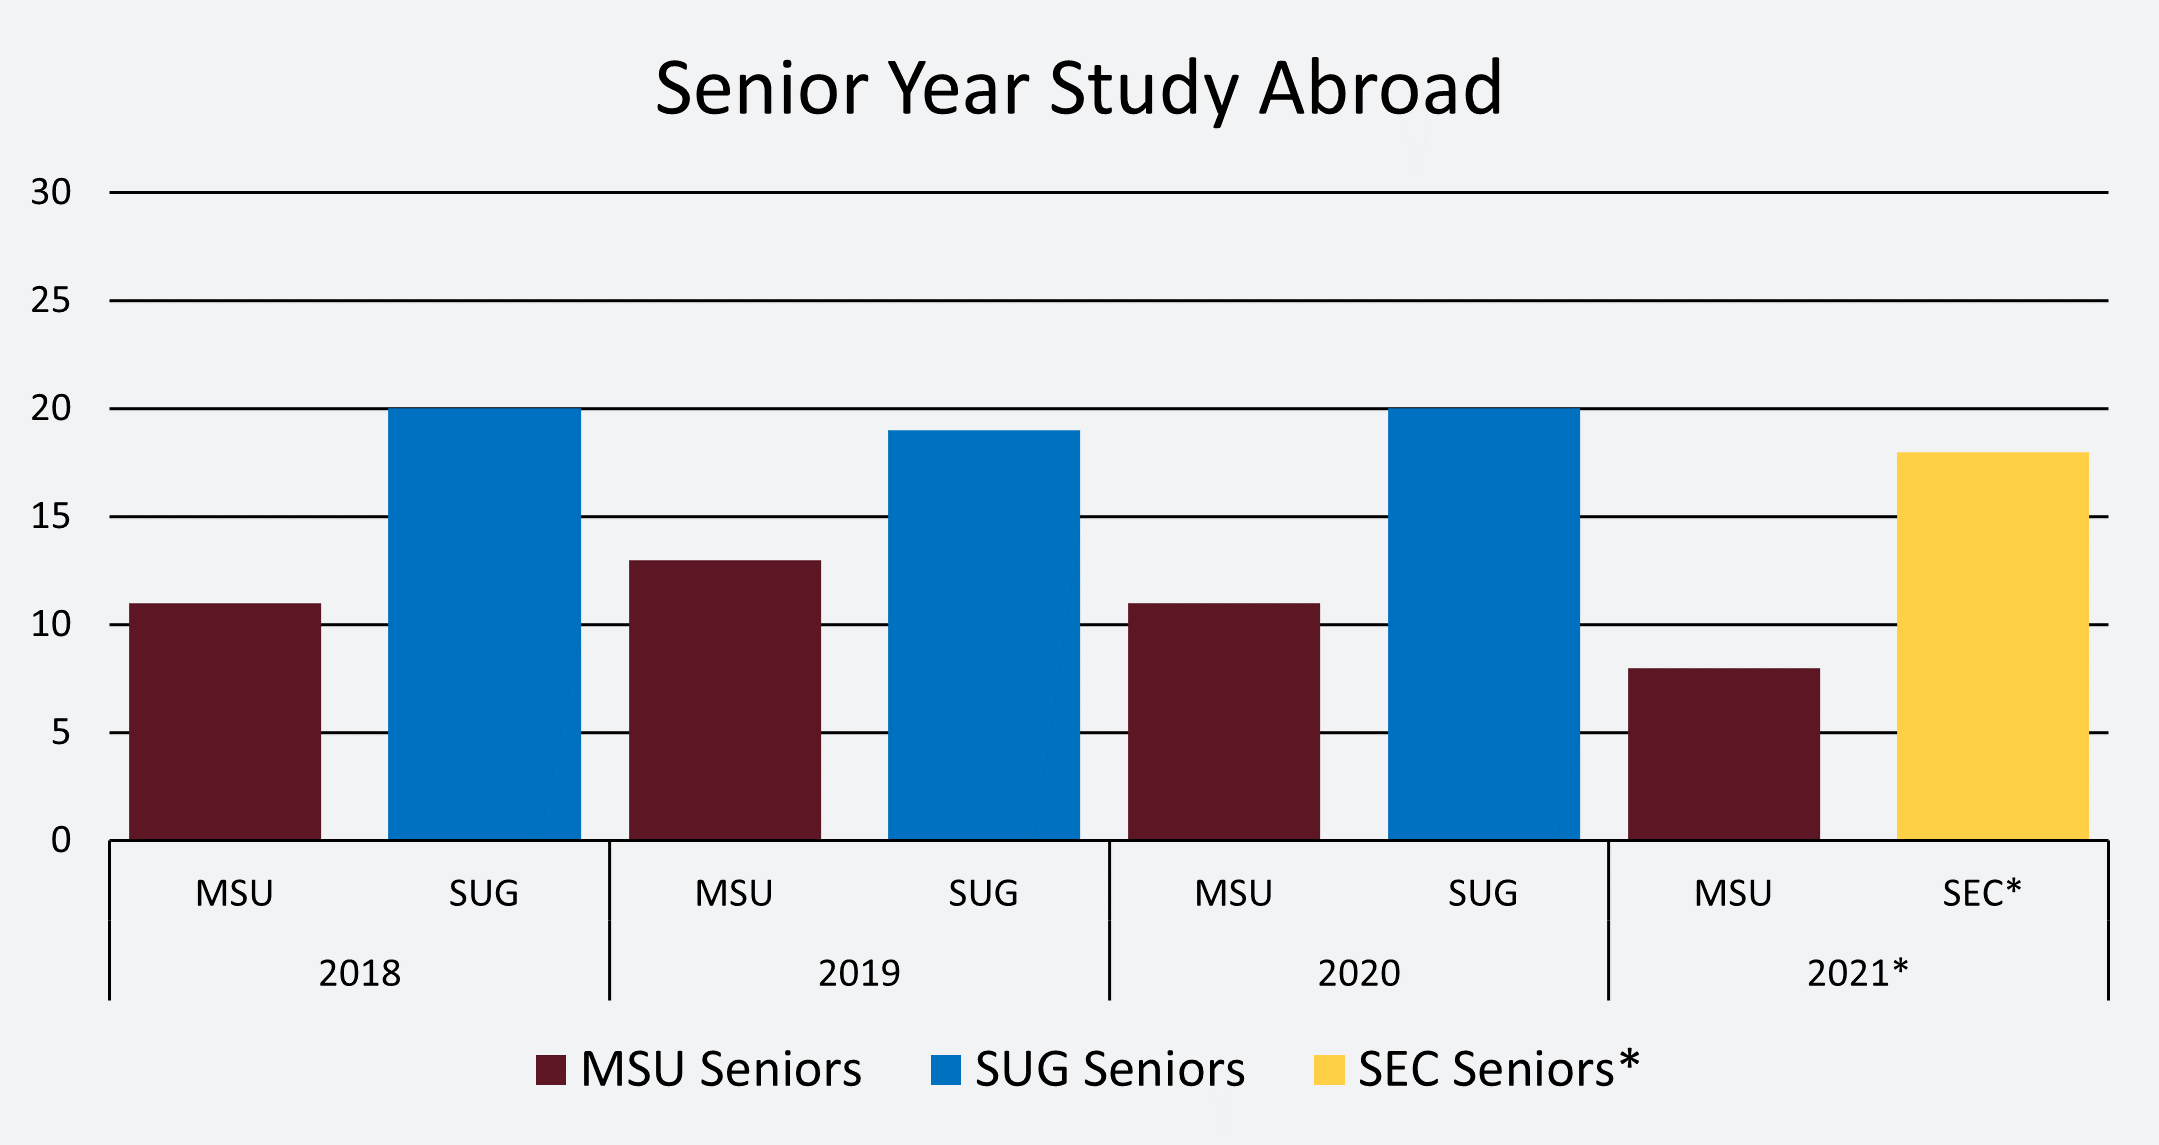 Chart showing NSSE Senior Year Study Abroad results between MSU and SUG.